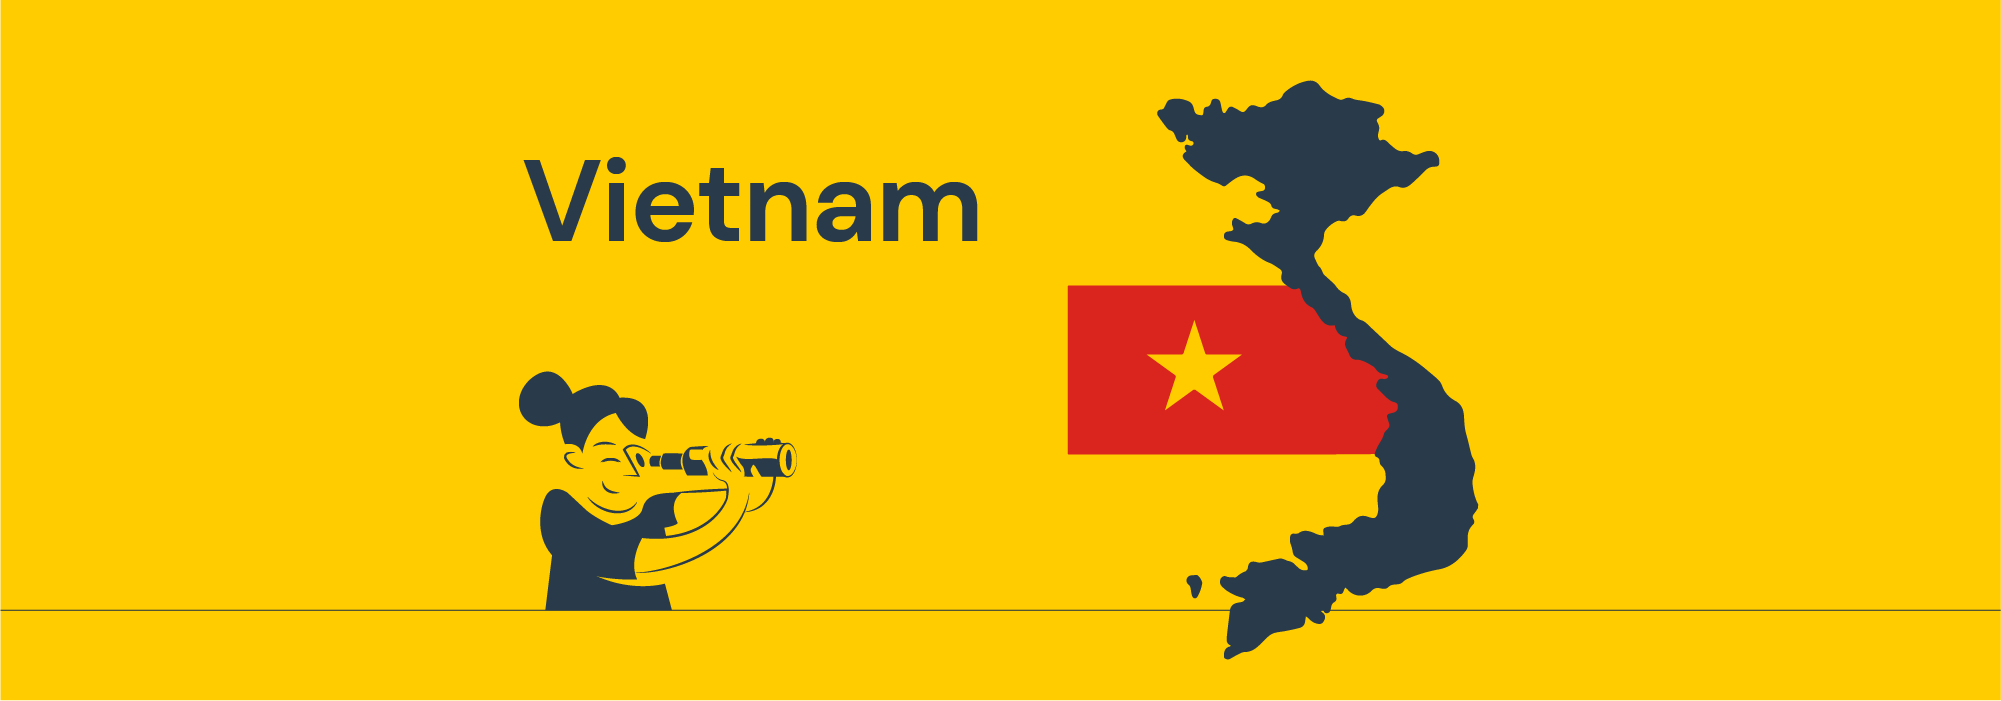 Vietnam trends: emerging source country for international students